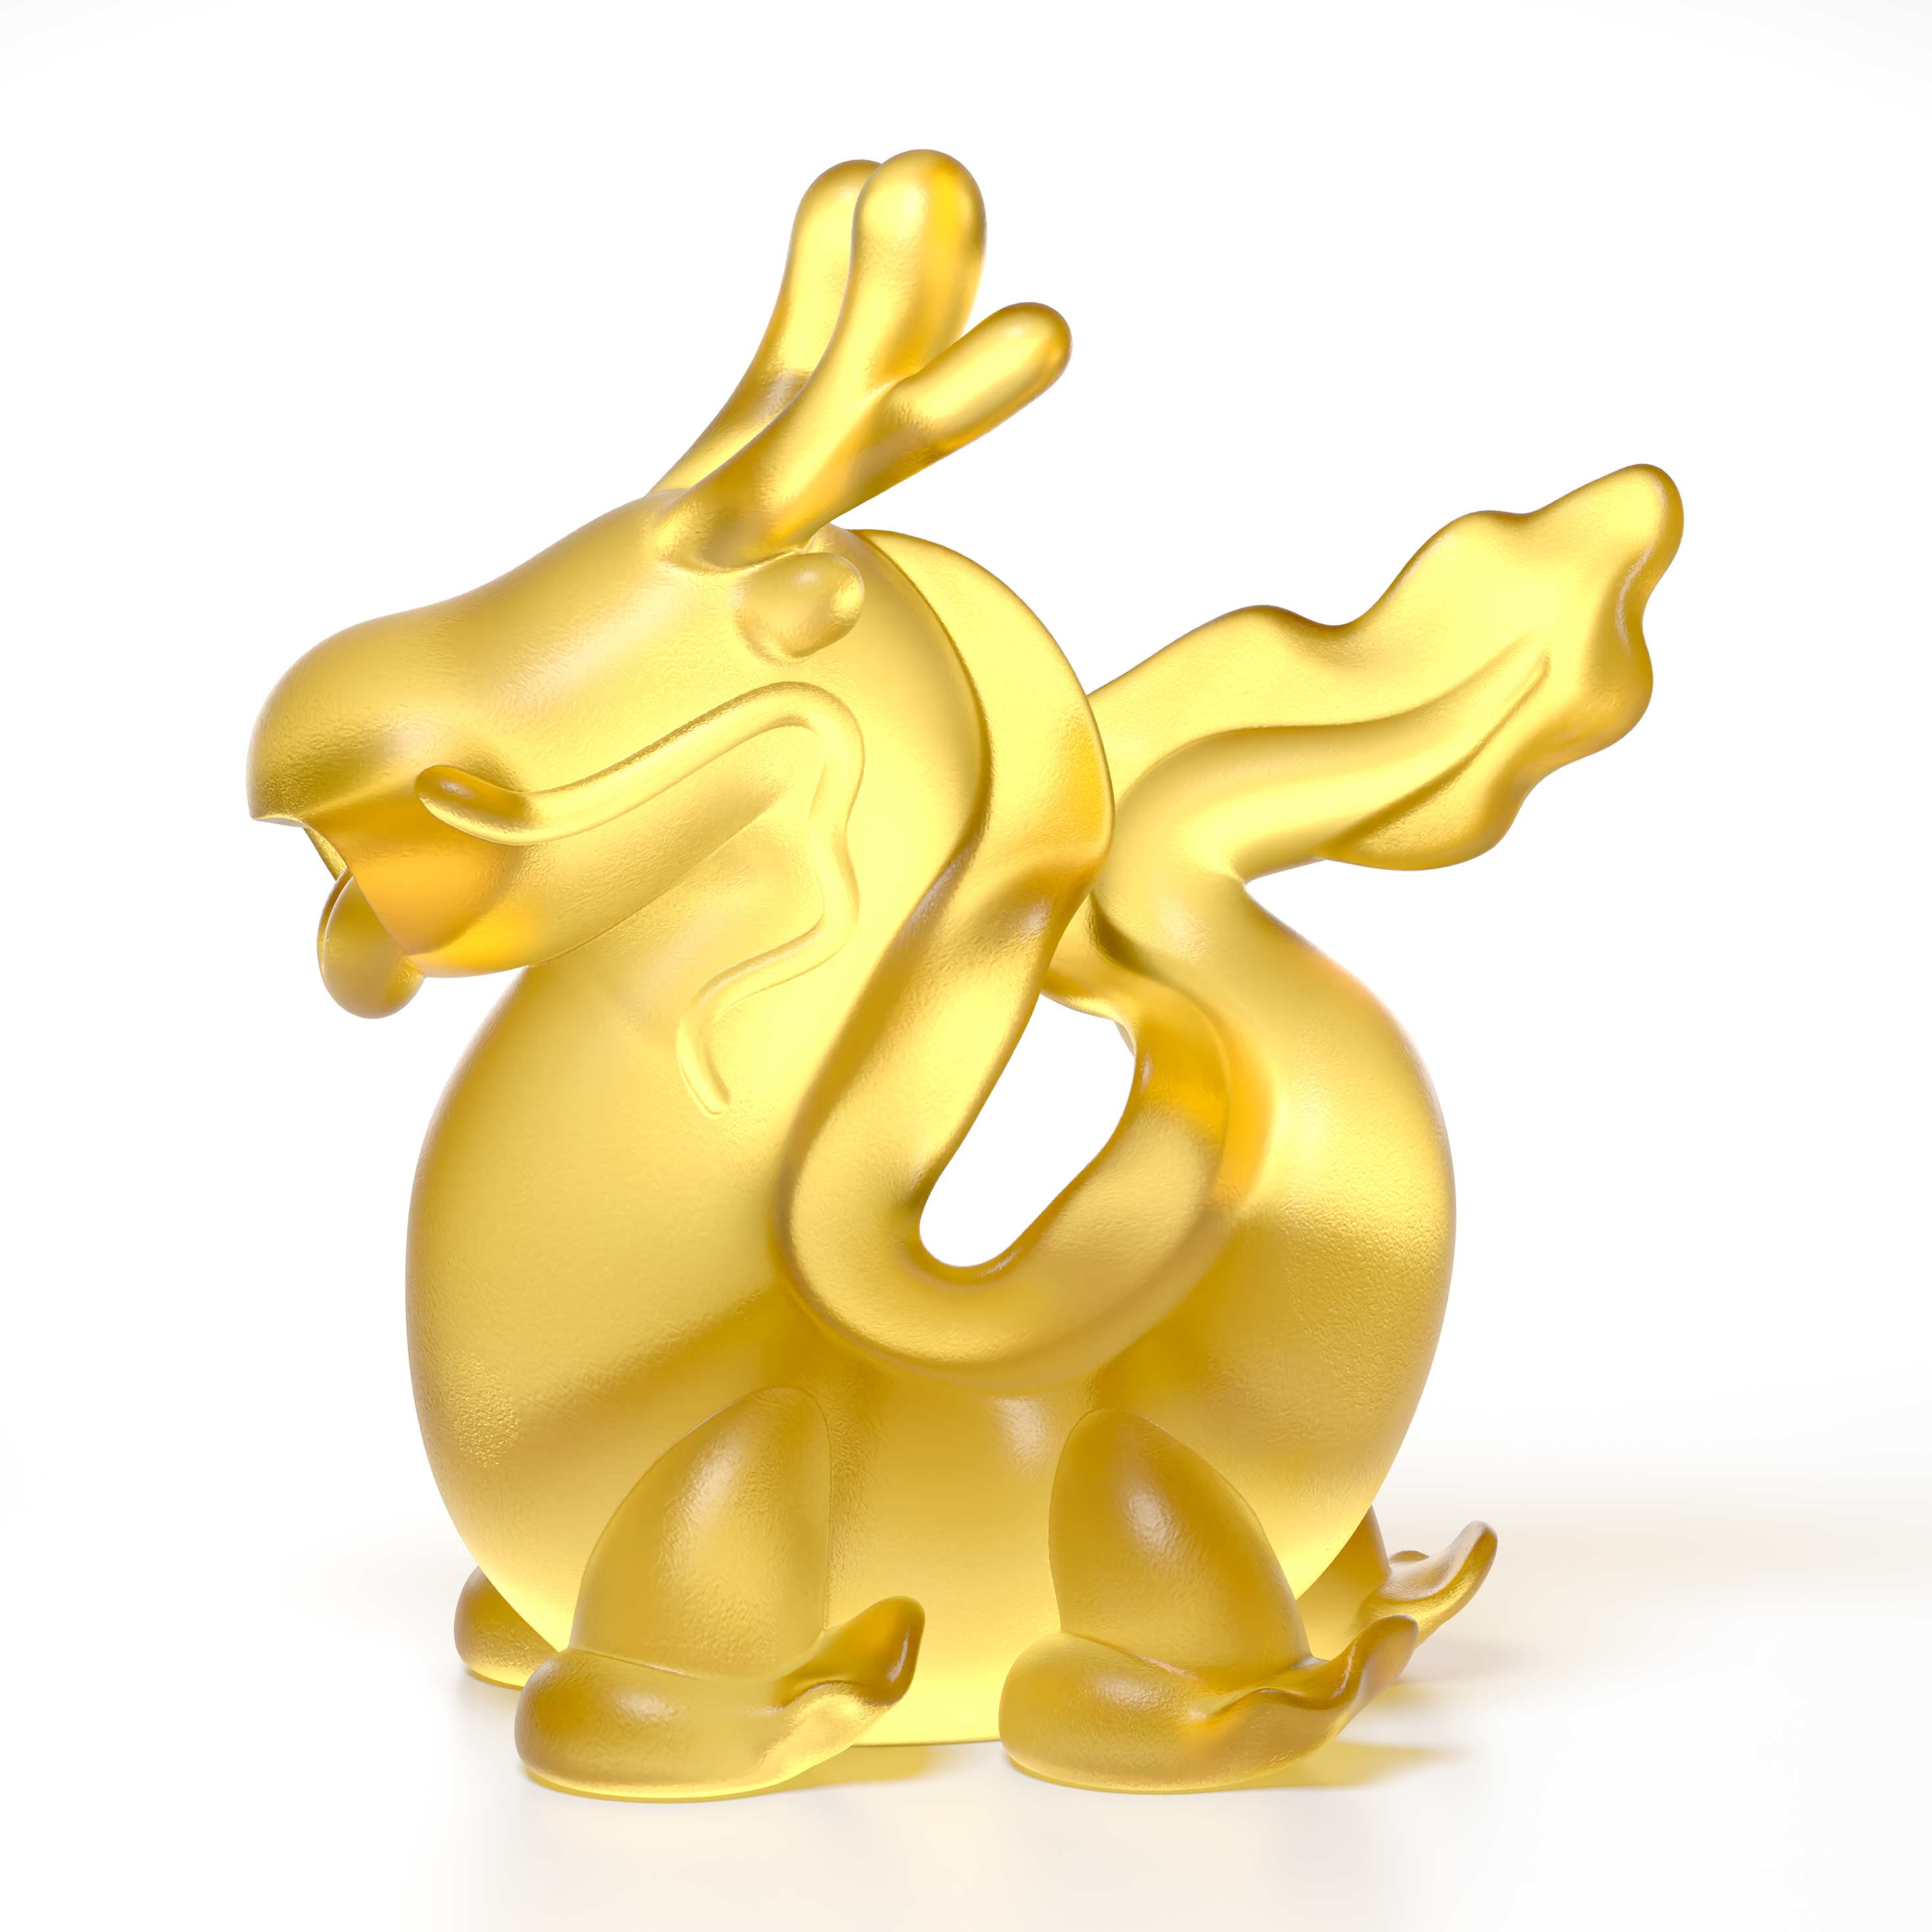 Dragon's Breath yellow crystal sculpture the size is  16 cm height, by Ferdi B Dick,  Limited edition of 50 side view 3